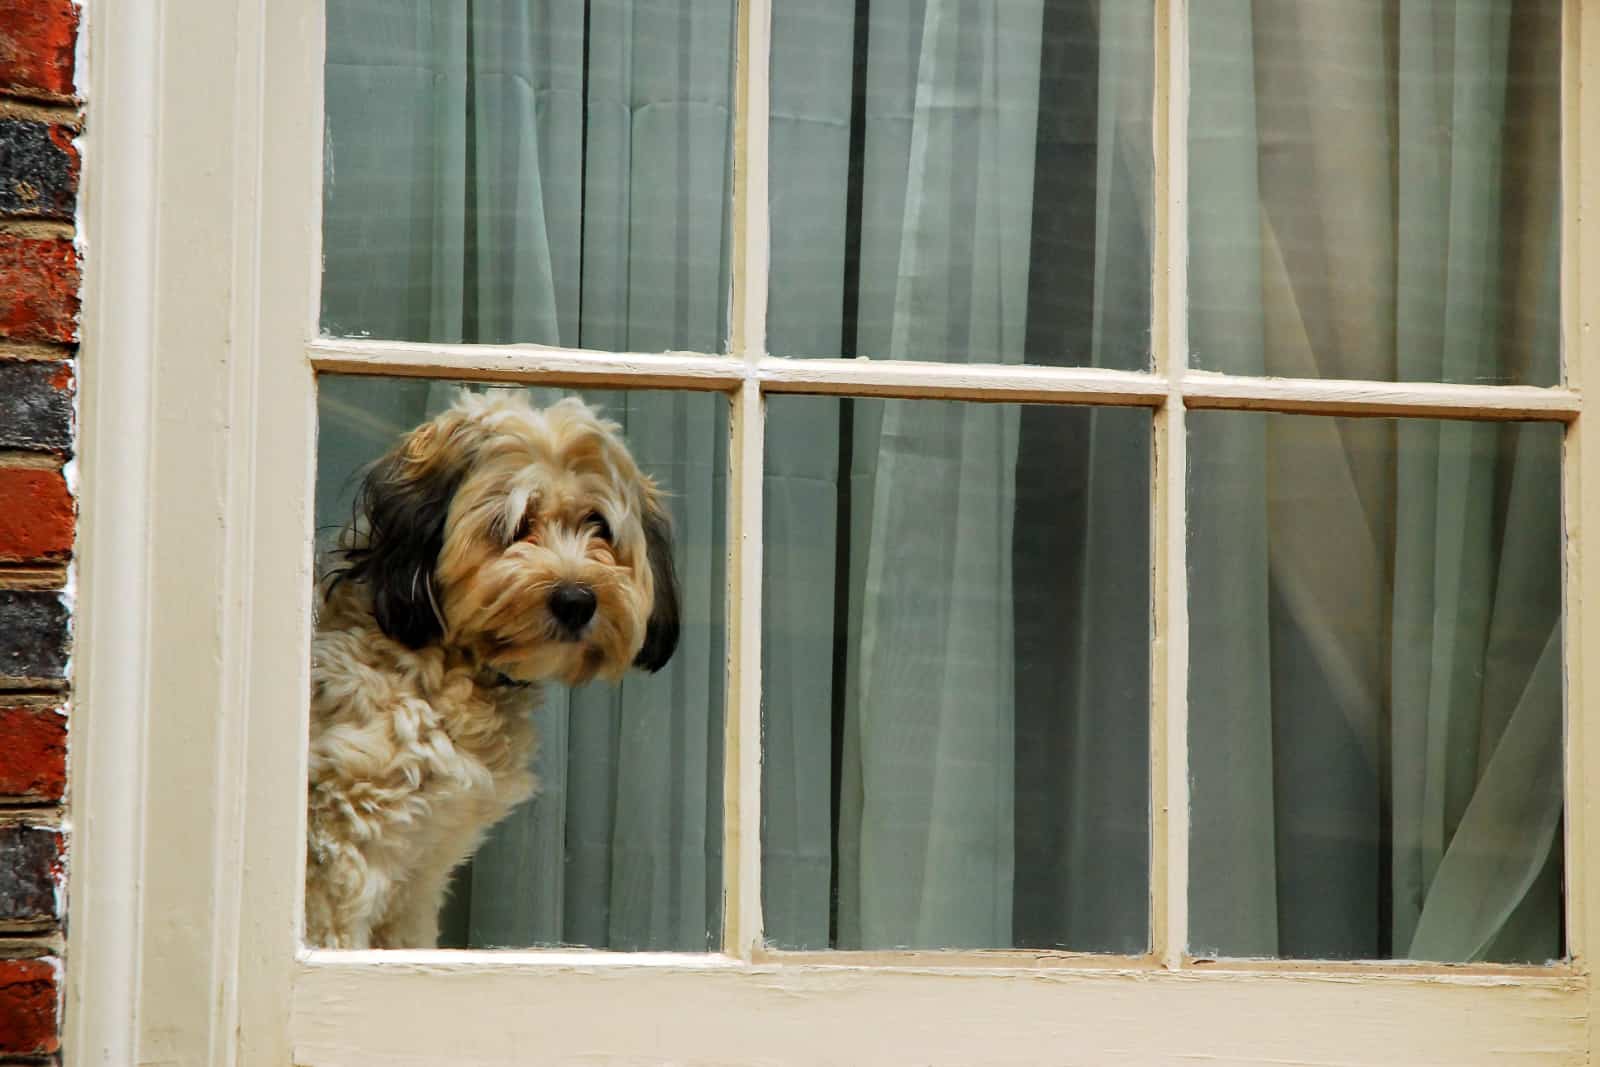 A cute dog alone in the house sits in the window